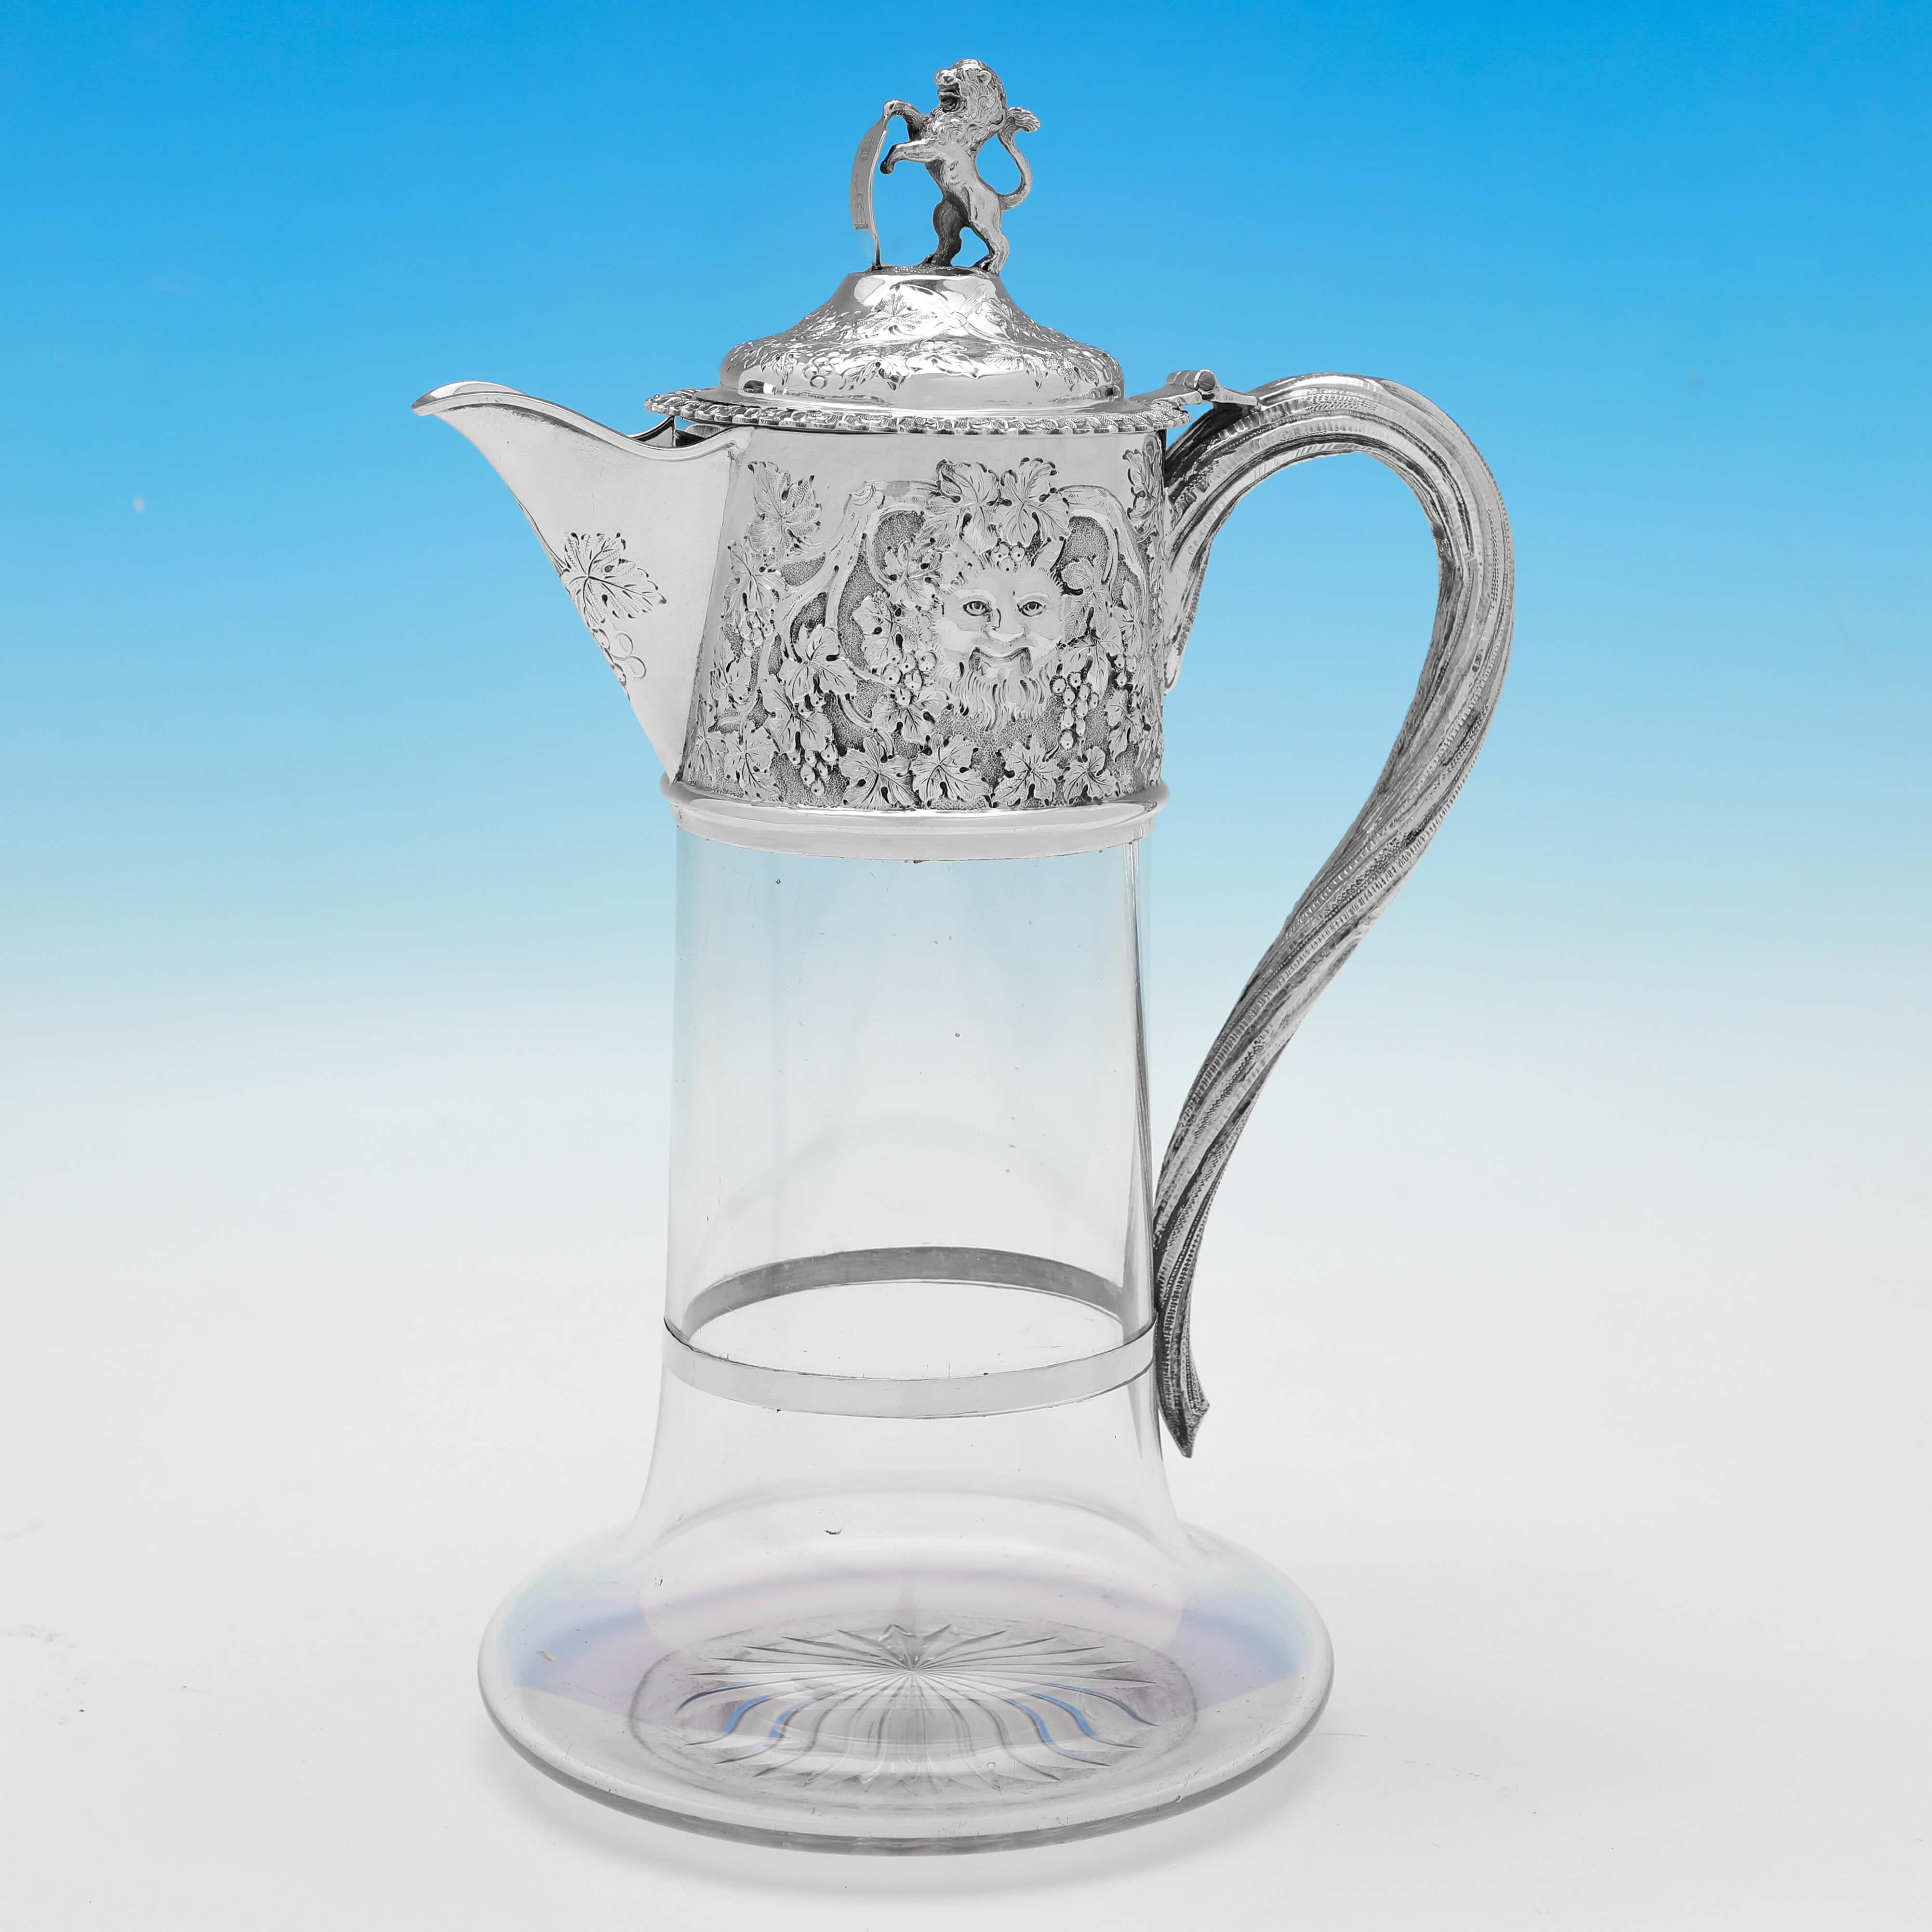 Hallmarked in London in 1874 by Charles Boyton, this striking and rare, Victorian, Antique Sterling Silver Pair of Claret Jugs, feature plain glass bodies, and ornate silver mounts with bacchus masks and grape and vine decoration, and finials of